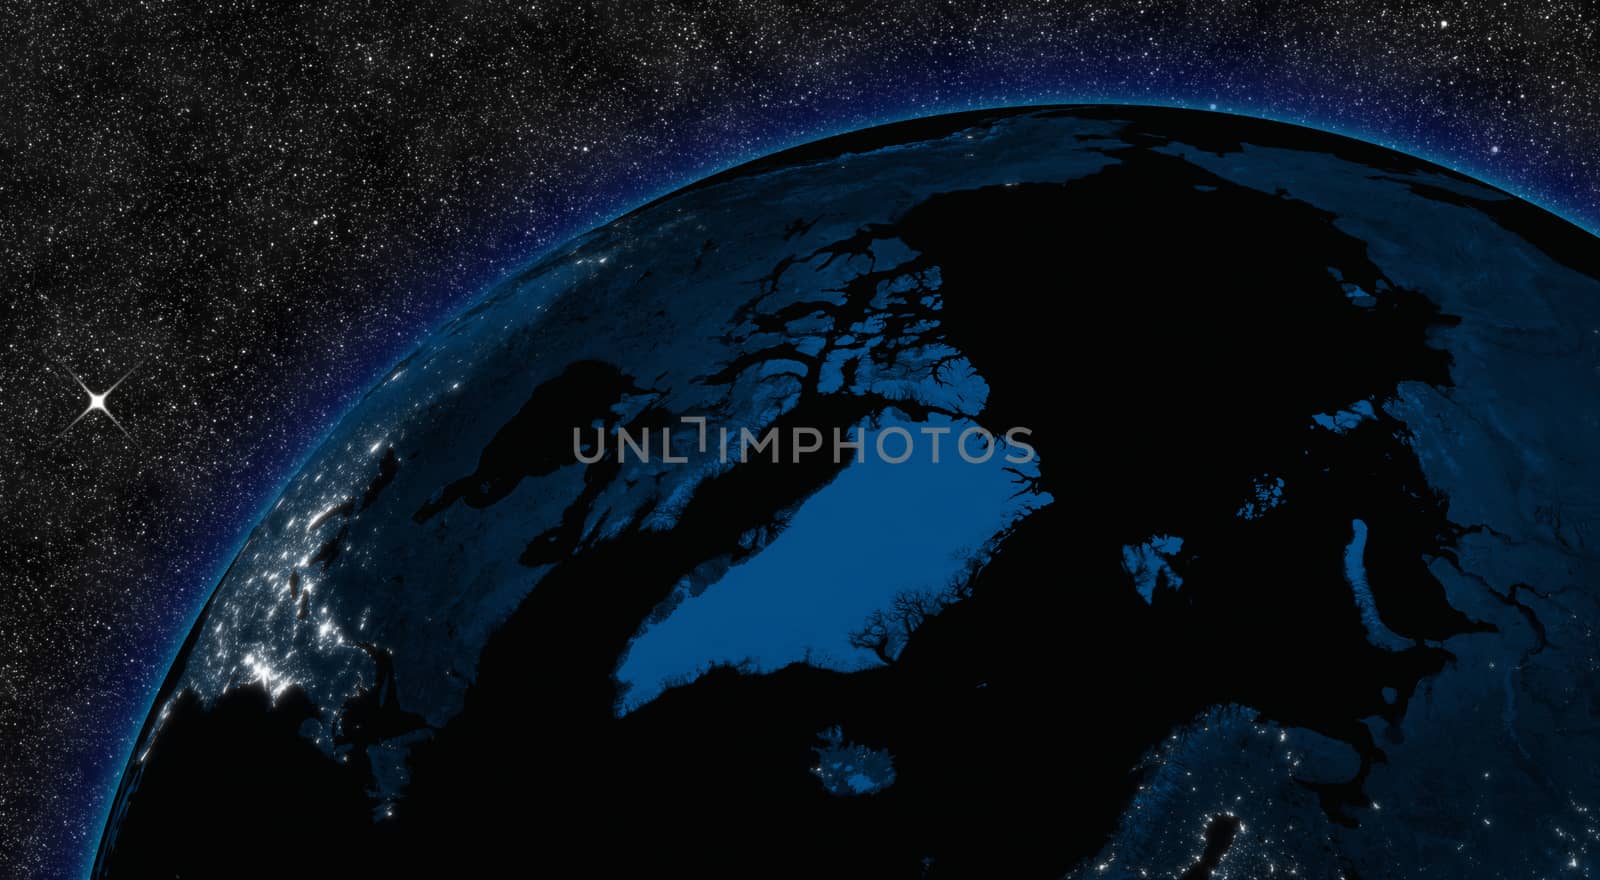 Night in Arctic region with city lights viewed from space. Elements of this image furnished by NASA.